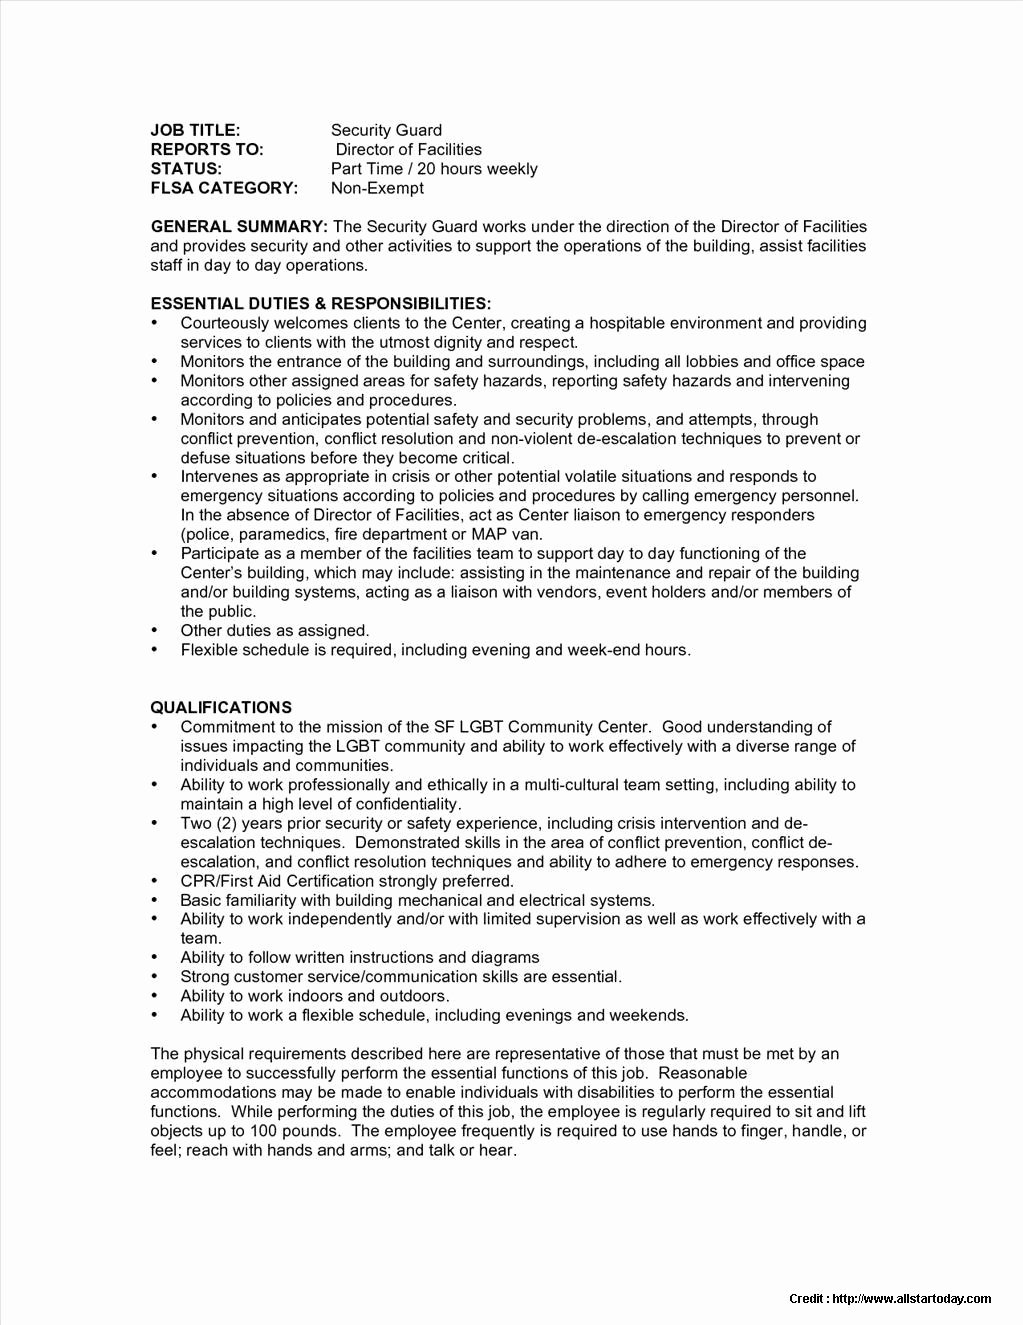 Sample Security Guard Resume No Experience Resume